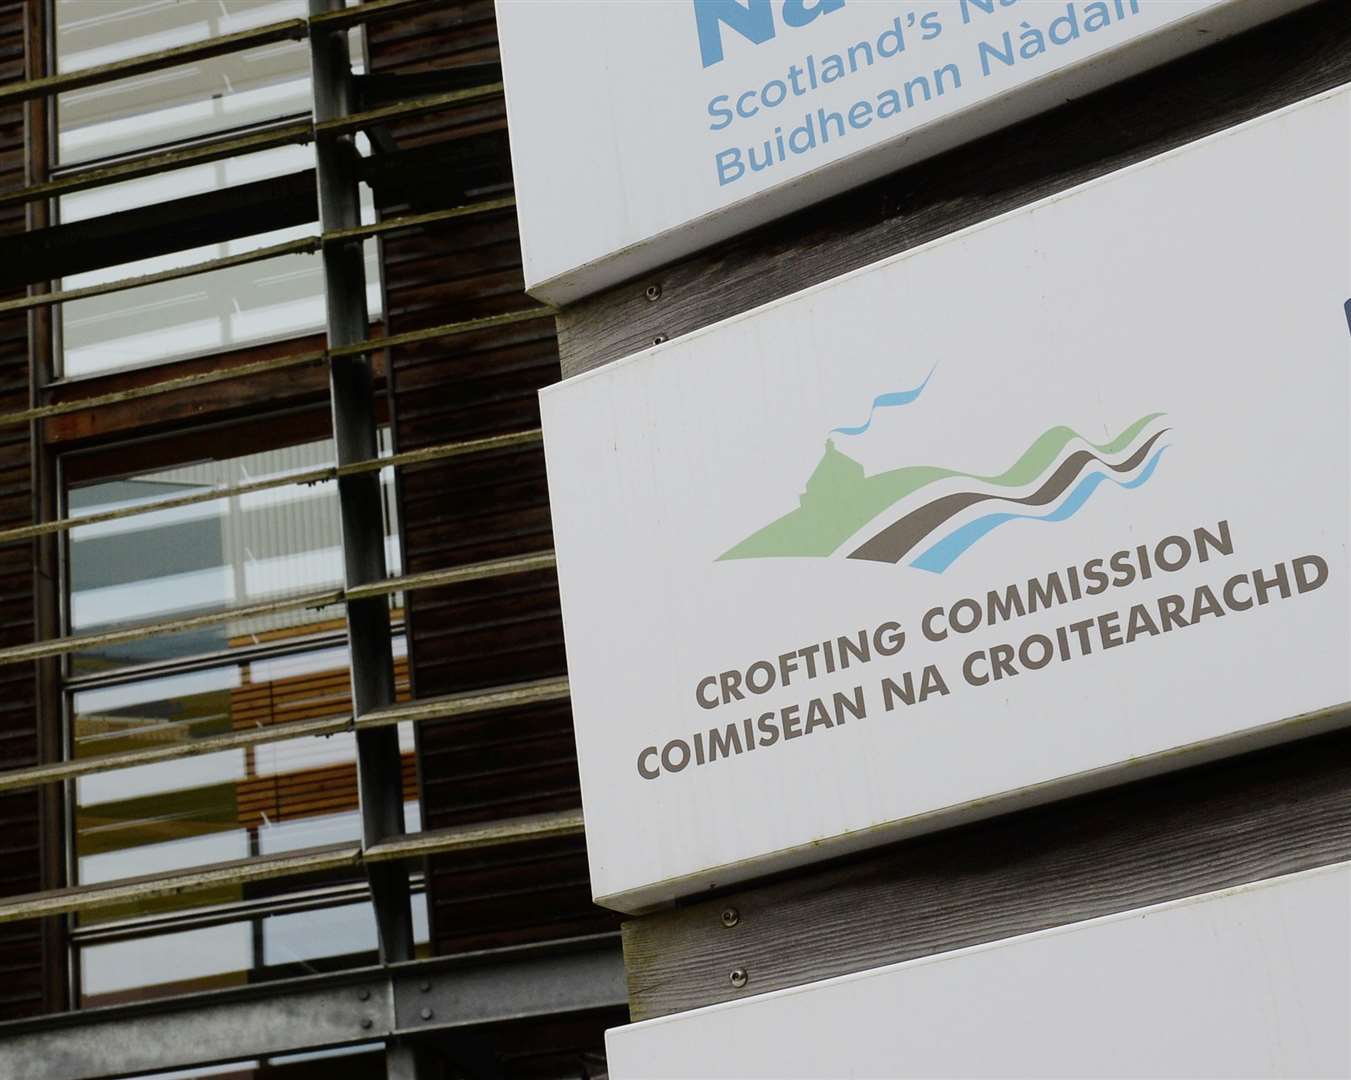 The Crofting Commission has announced changes which will come into effect next month.